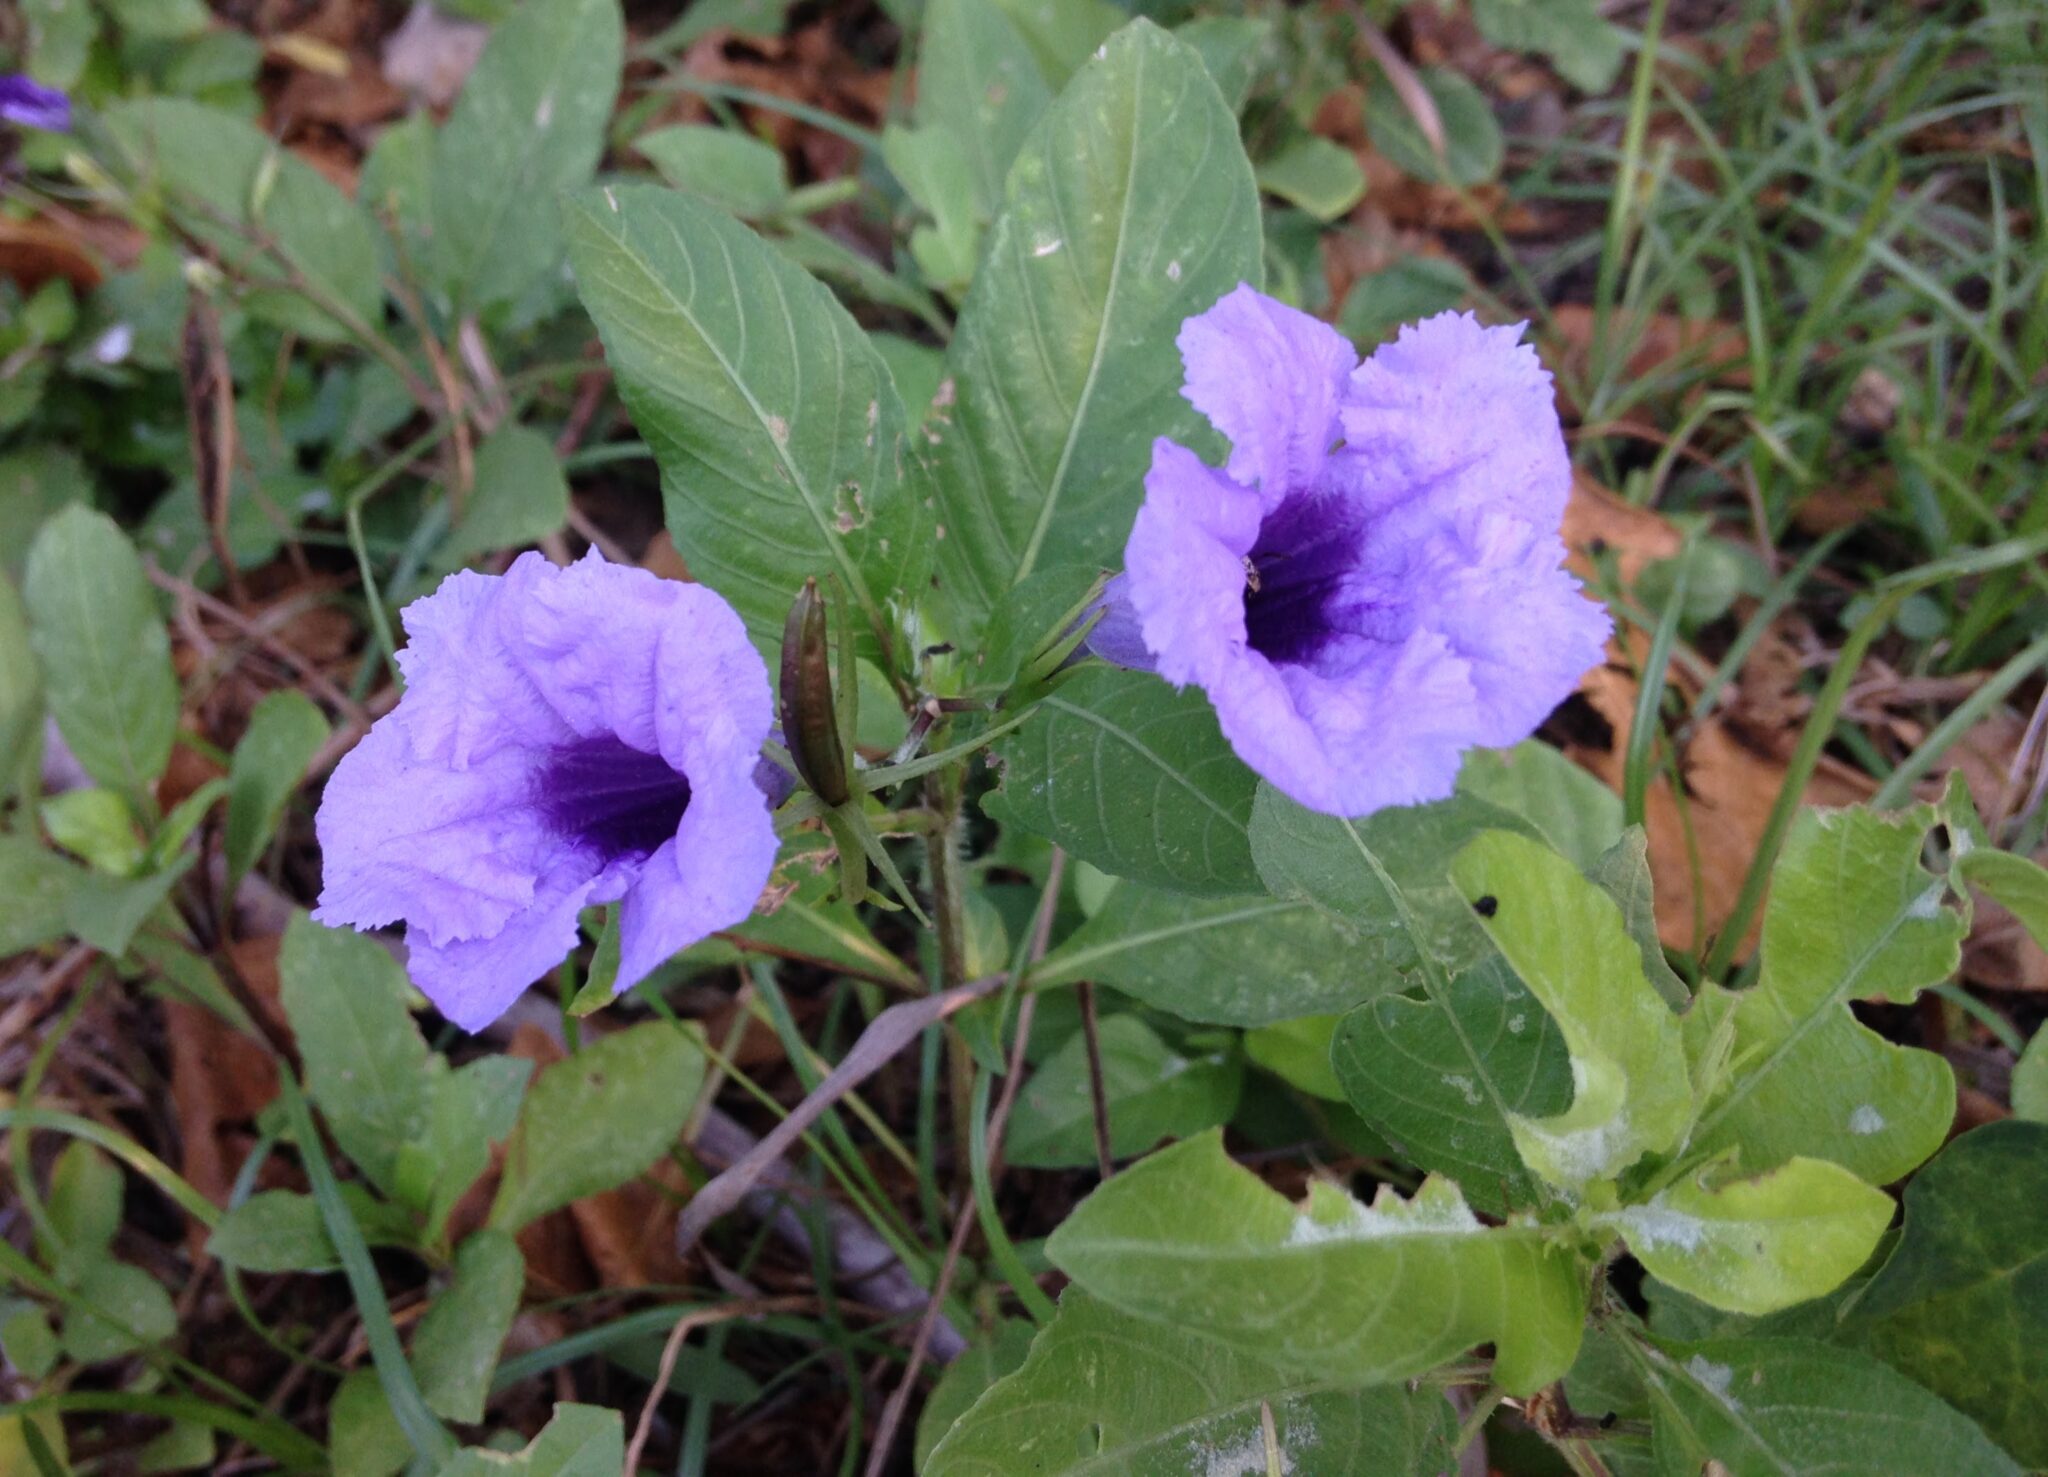 Two purple flower blossoms aid green foliage. The flowers are broadly tubular with a dark throat. There are five corolla lobes.